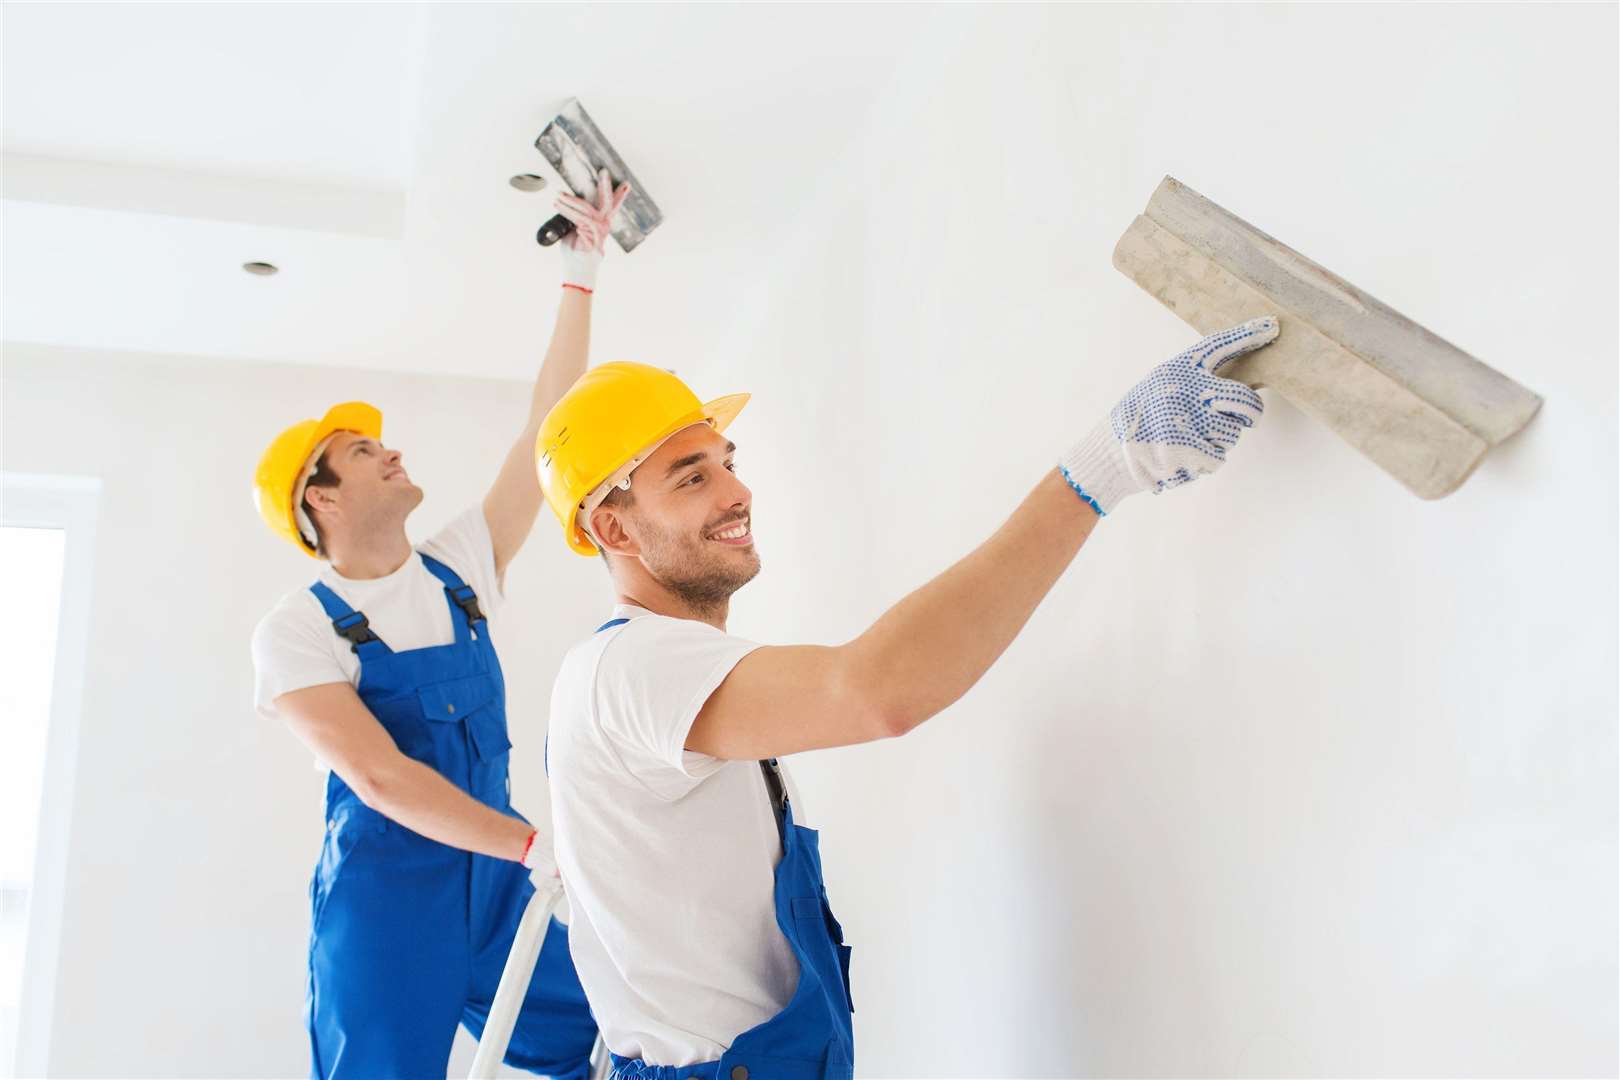 There are concerns of a growing shortage in construction skills - including plastering and decorating